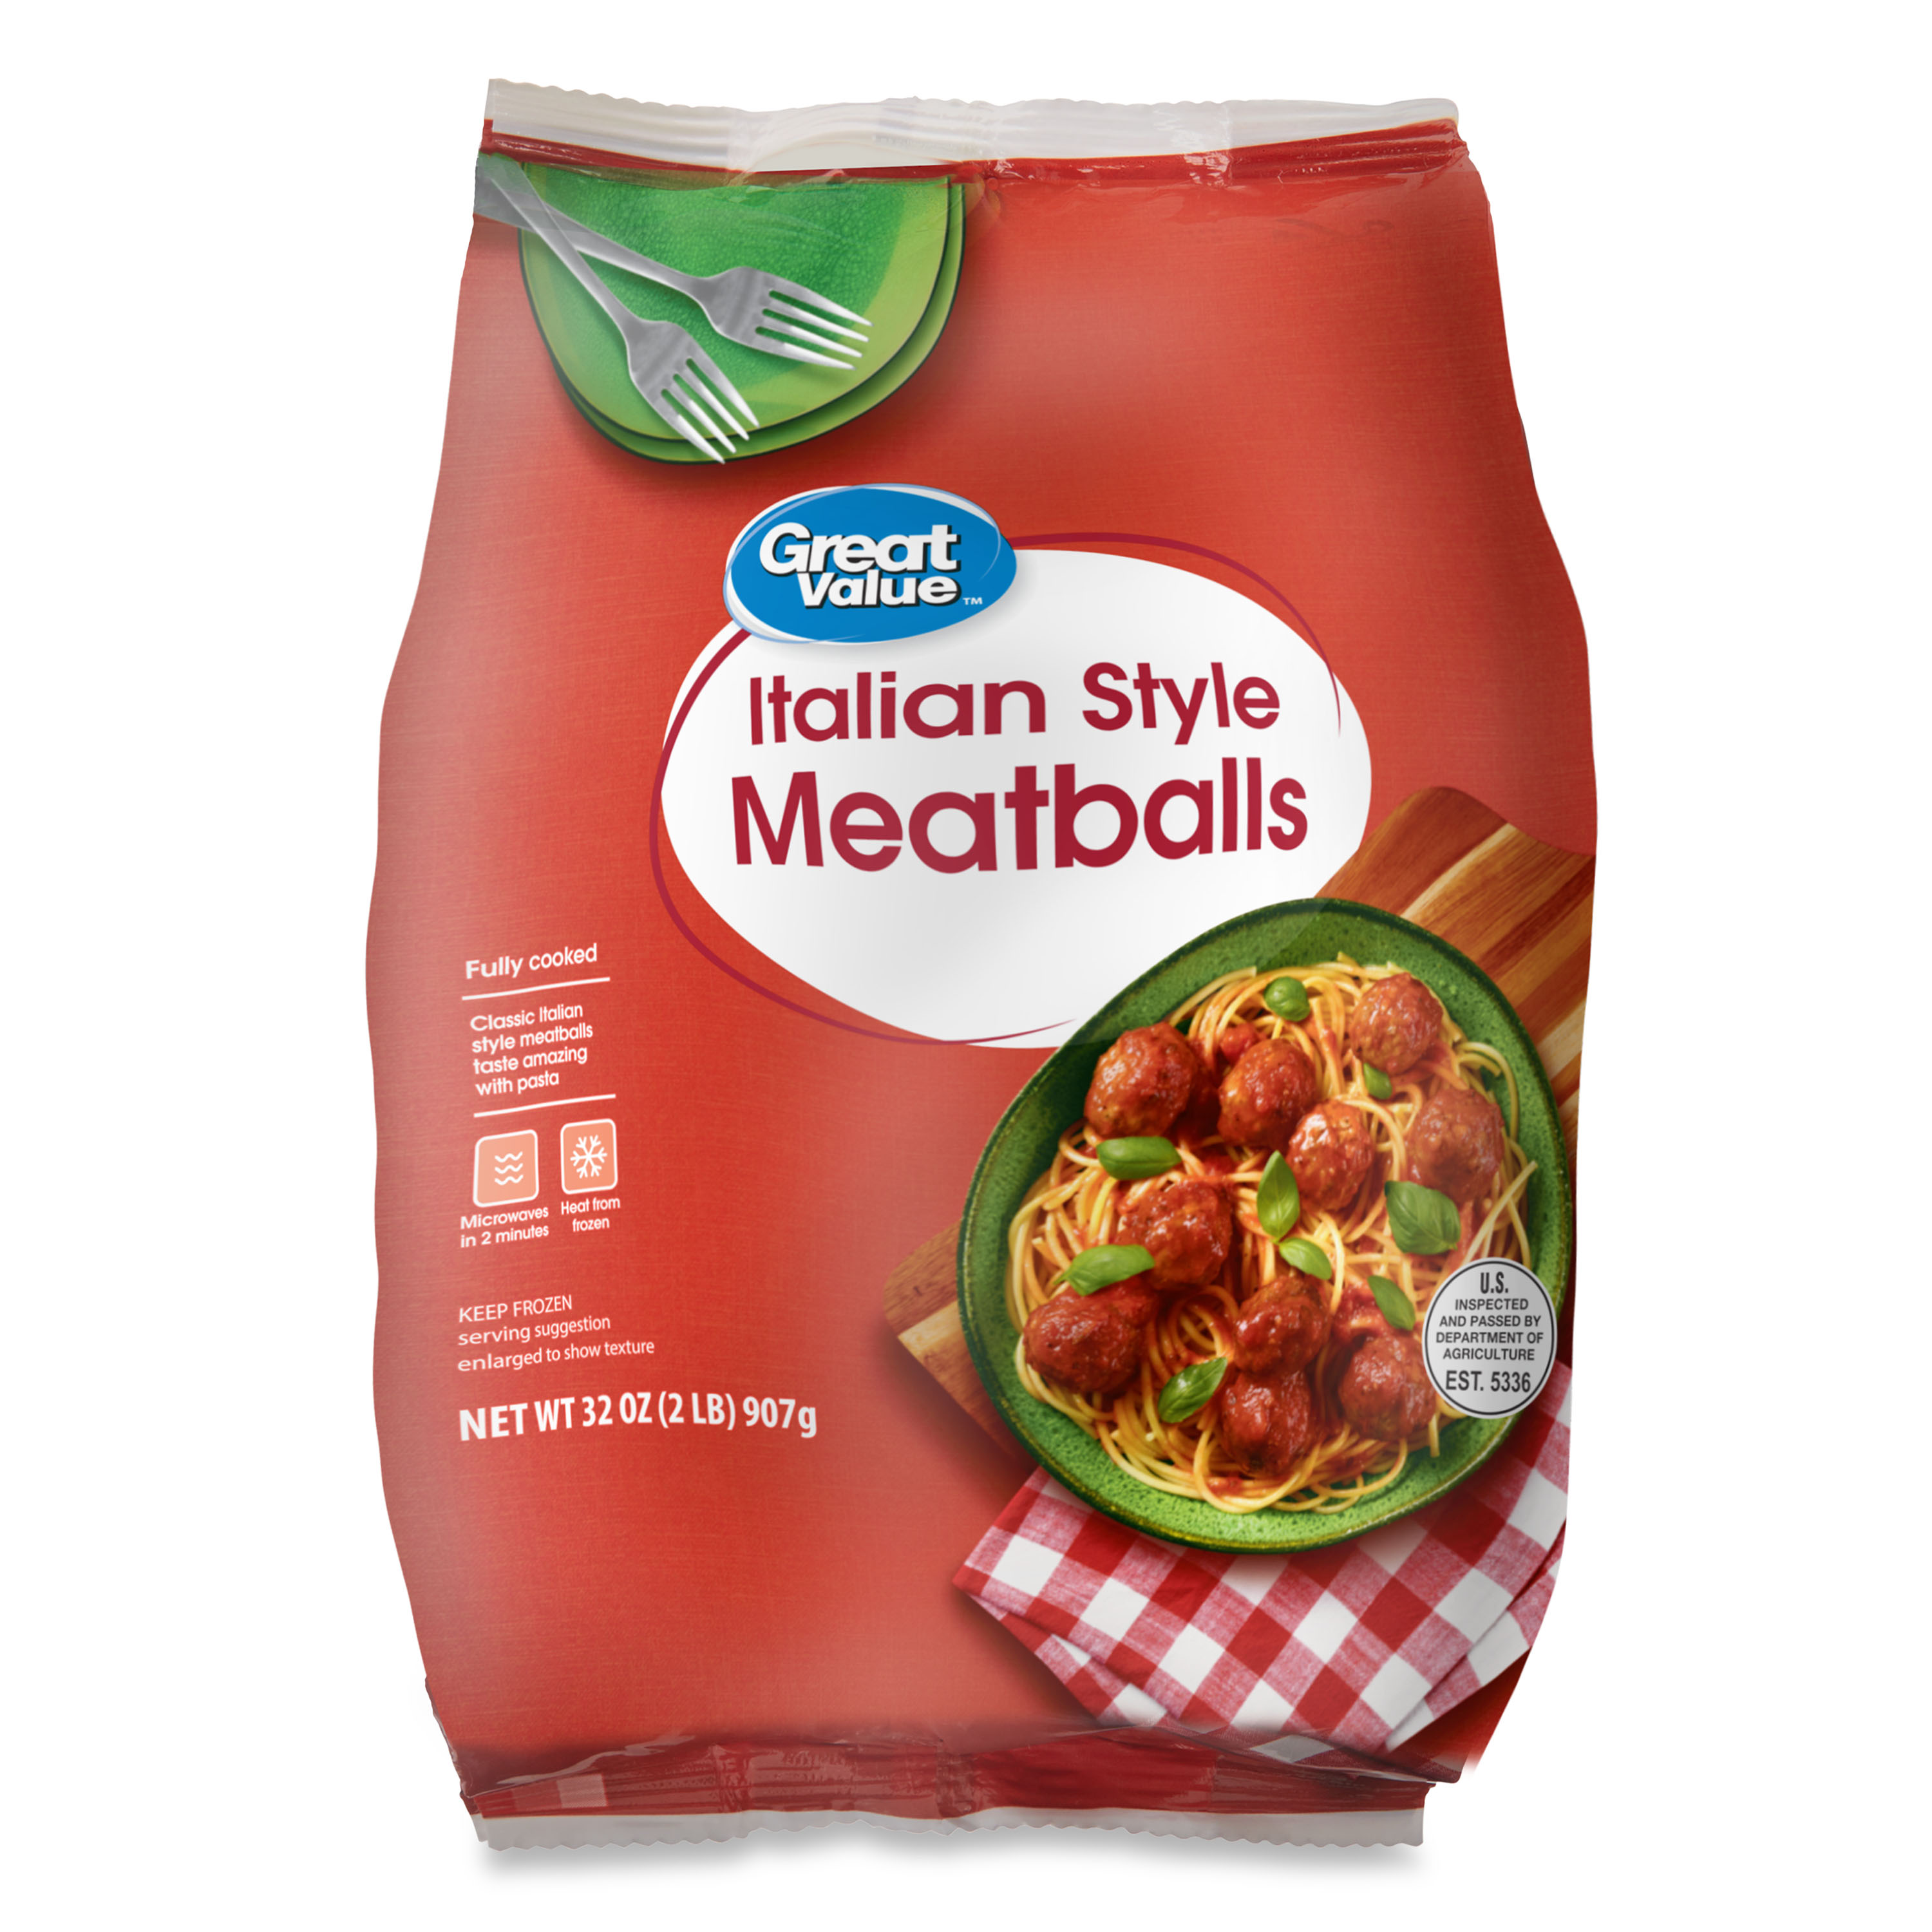 Great Value Fully Cooked Italian Style Meatballs, 32 oz (Frozen) - image 1 of 8